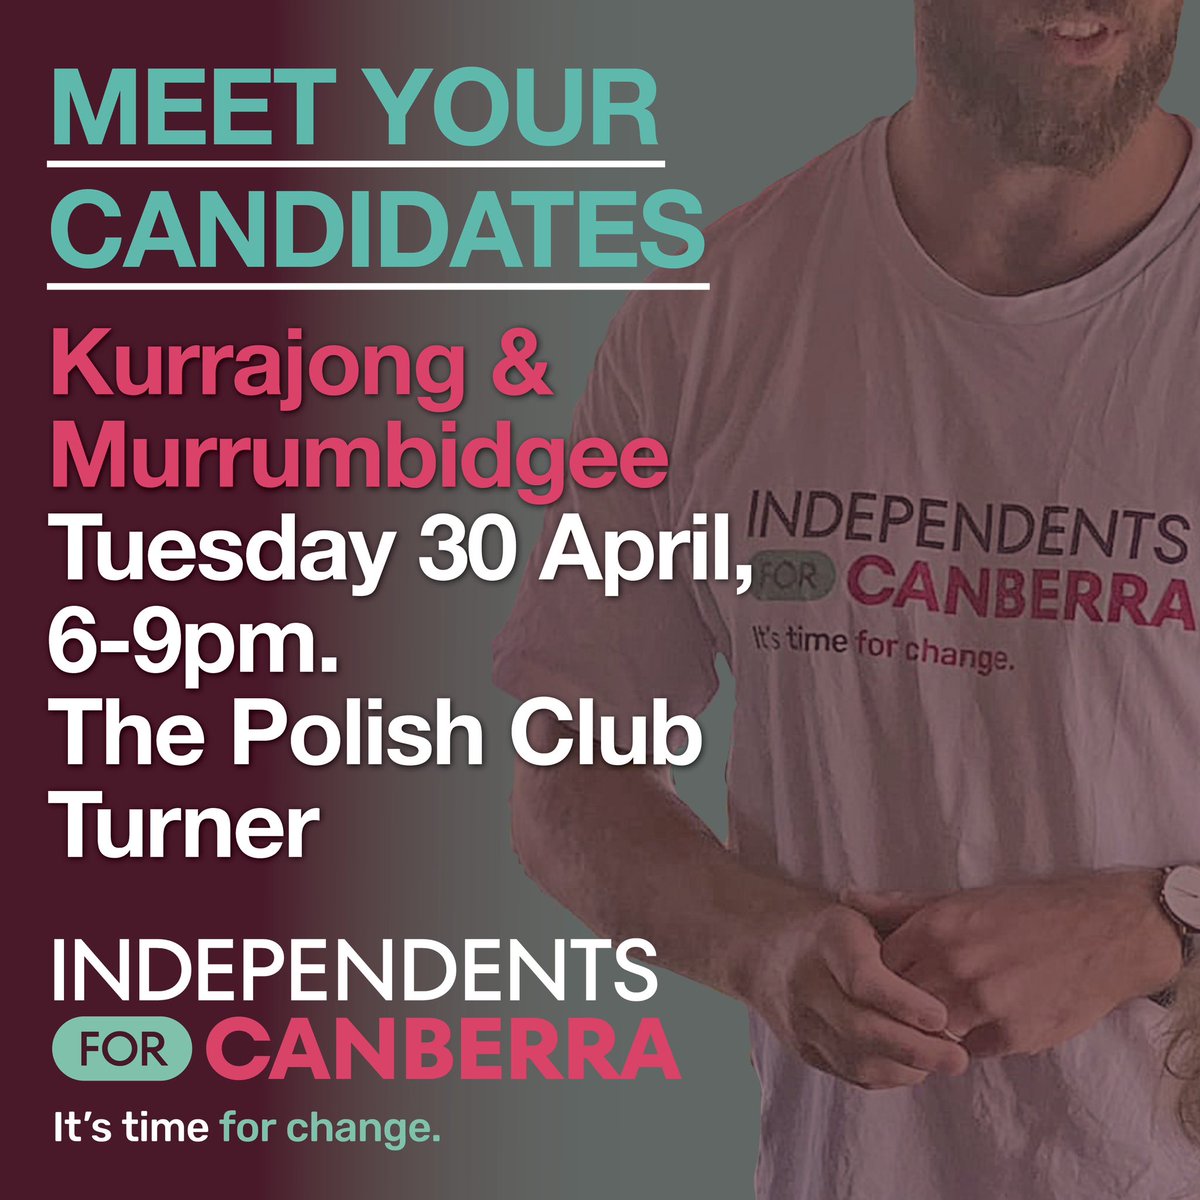 Calling people of the inner north/south, Woden Valley, Weston Creek & Molonglo Valley to attend this town hall event! Hear from prospective candidates, ask questions & provide input to inform who runs under our banner. It’s time for change. RSVP at independentsforcanberra.com/kurrajong_cand…